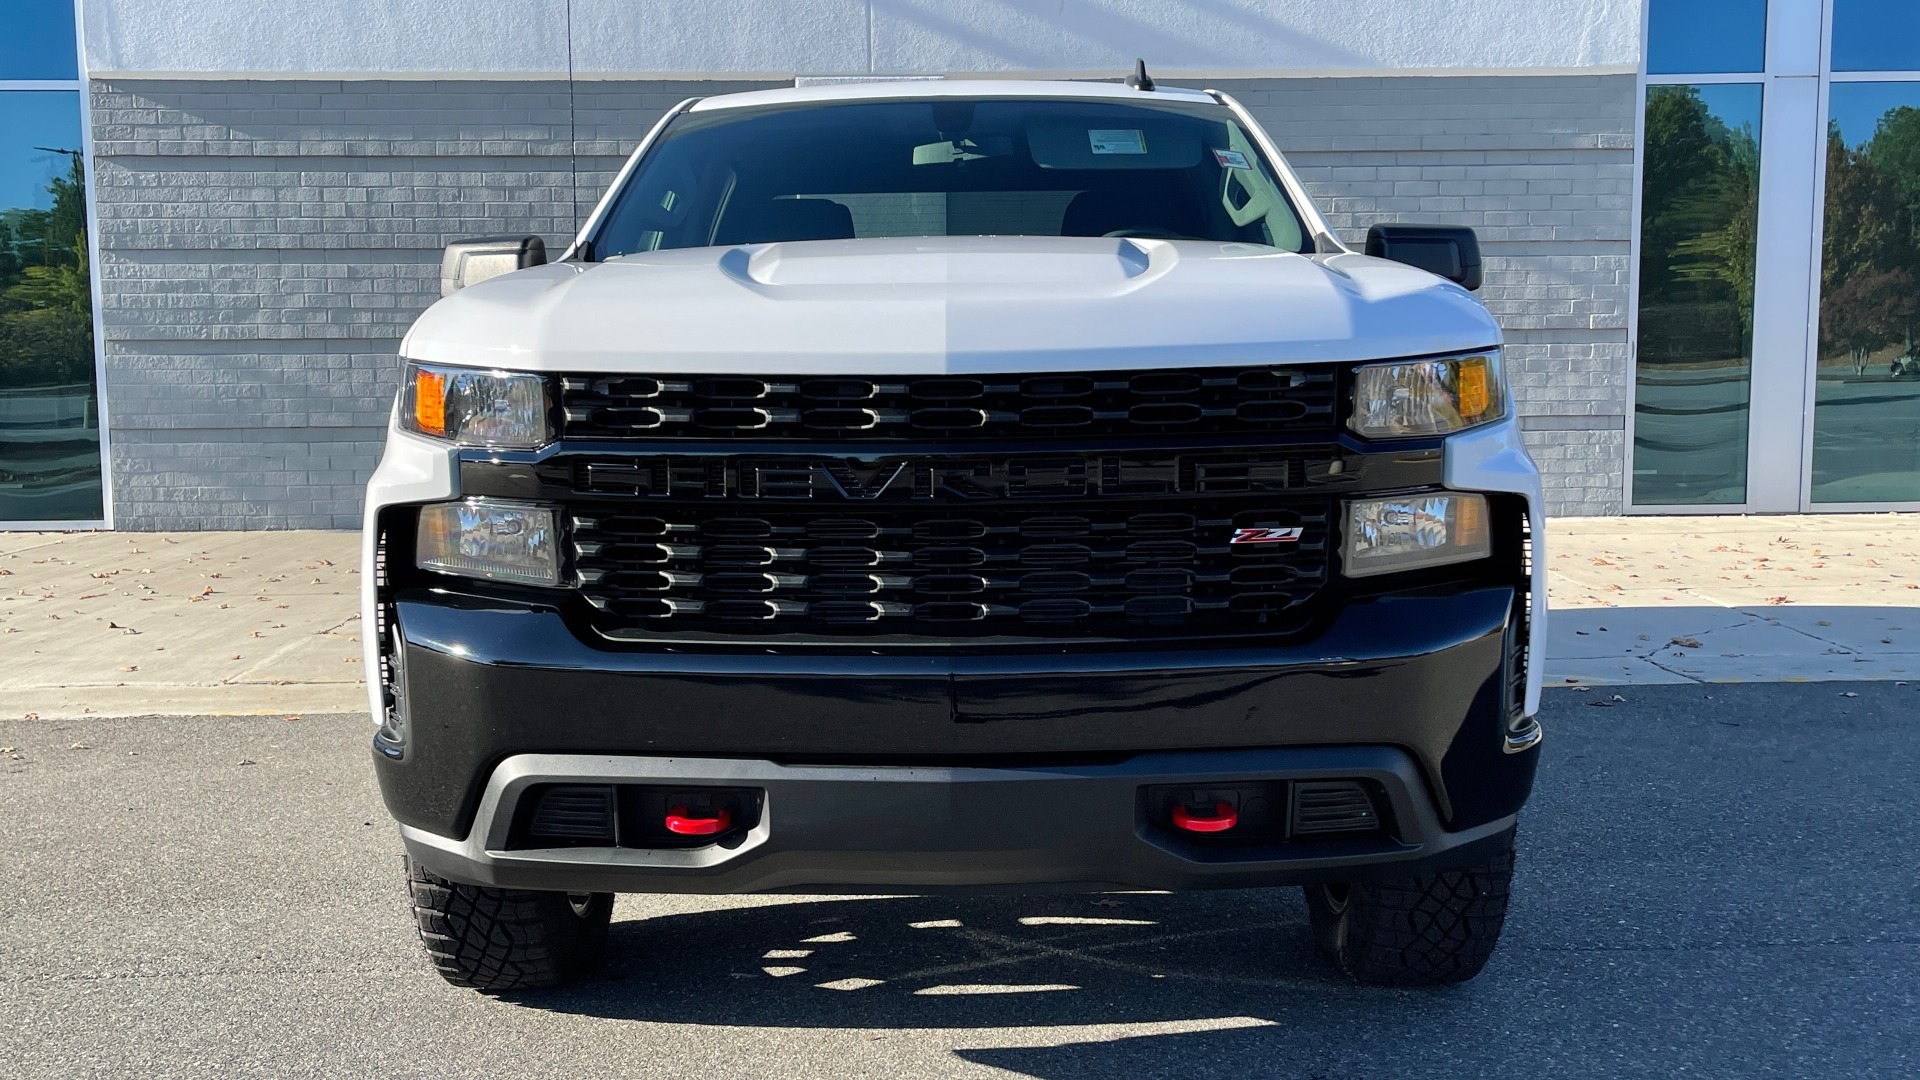 Used 2021 Chevrolet SILVERADO 1500 CUSTOM TRAIL BOSS 4X4 / 5.3L V8 / 6-SPD AUT0 / REARVIEW for sale Sold at Formula Imports in Charlotte NC 28227 11